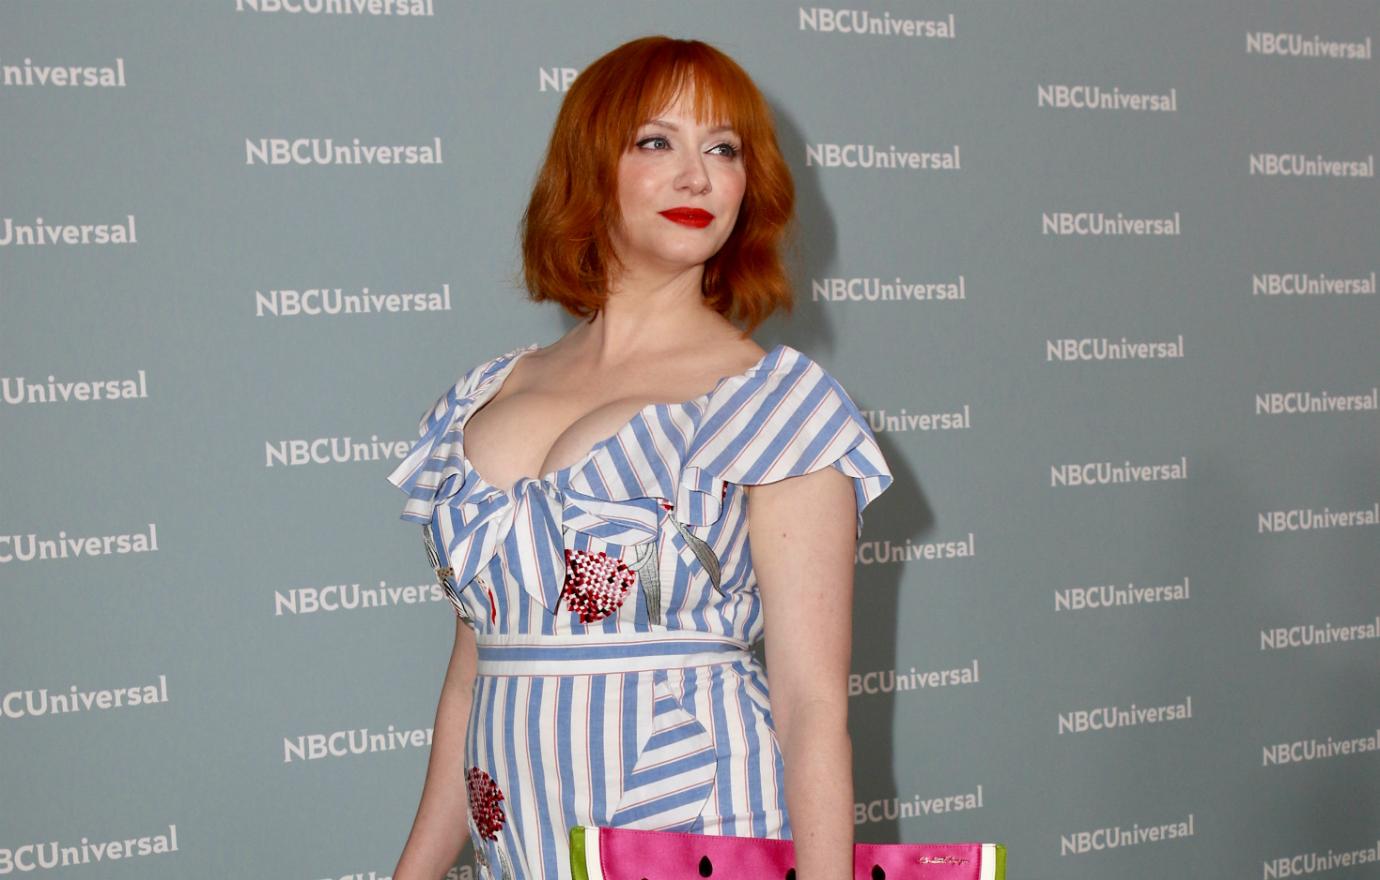 Christina Hendricks wears a cleavage baring striped and floral patterned dress with butterfly sleeves, red hair in a wavy red bob with bangs at the 2018 NBC Upfronts.